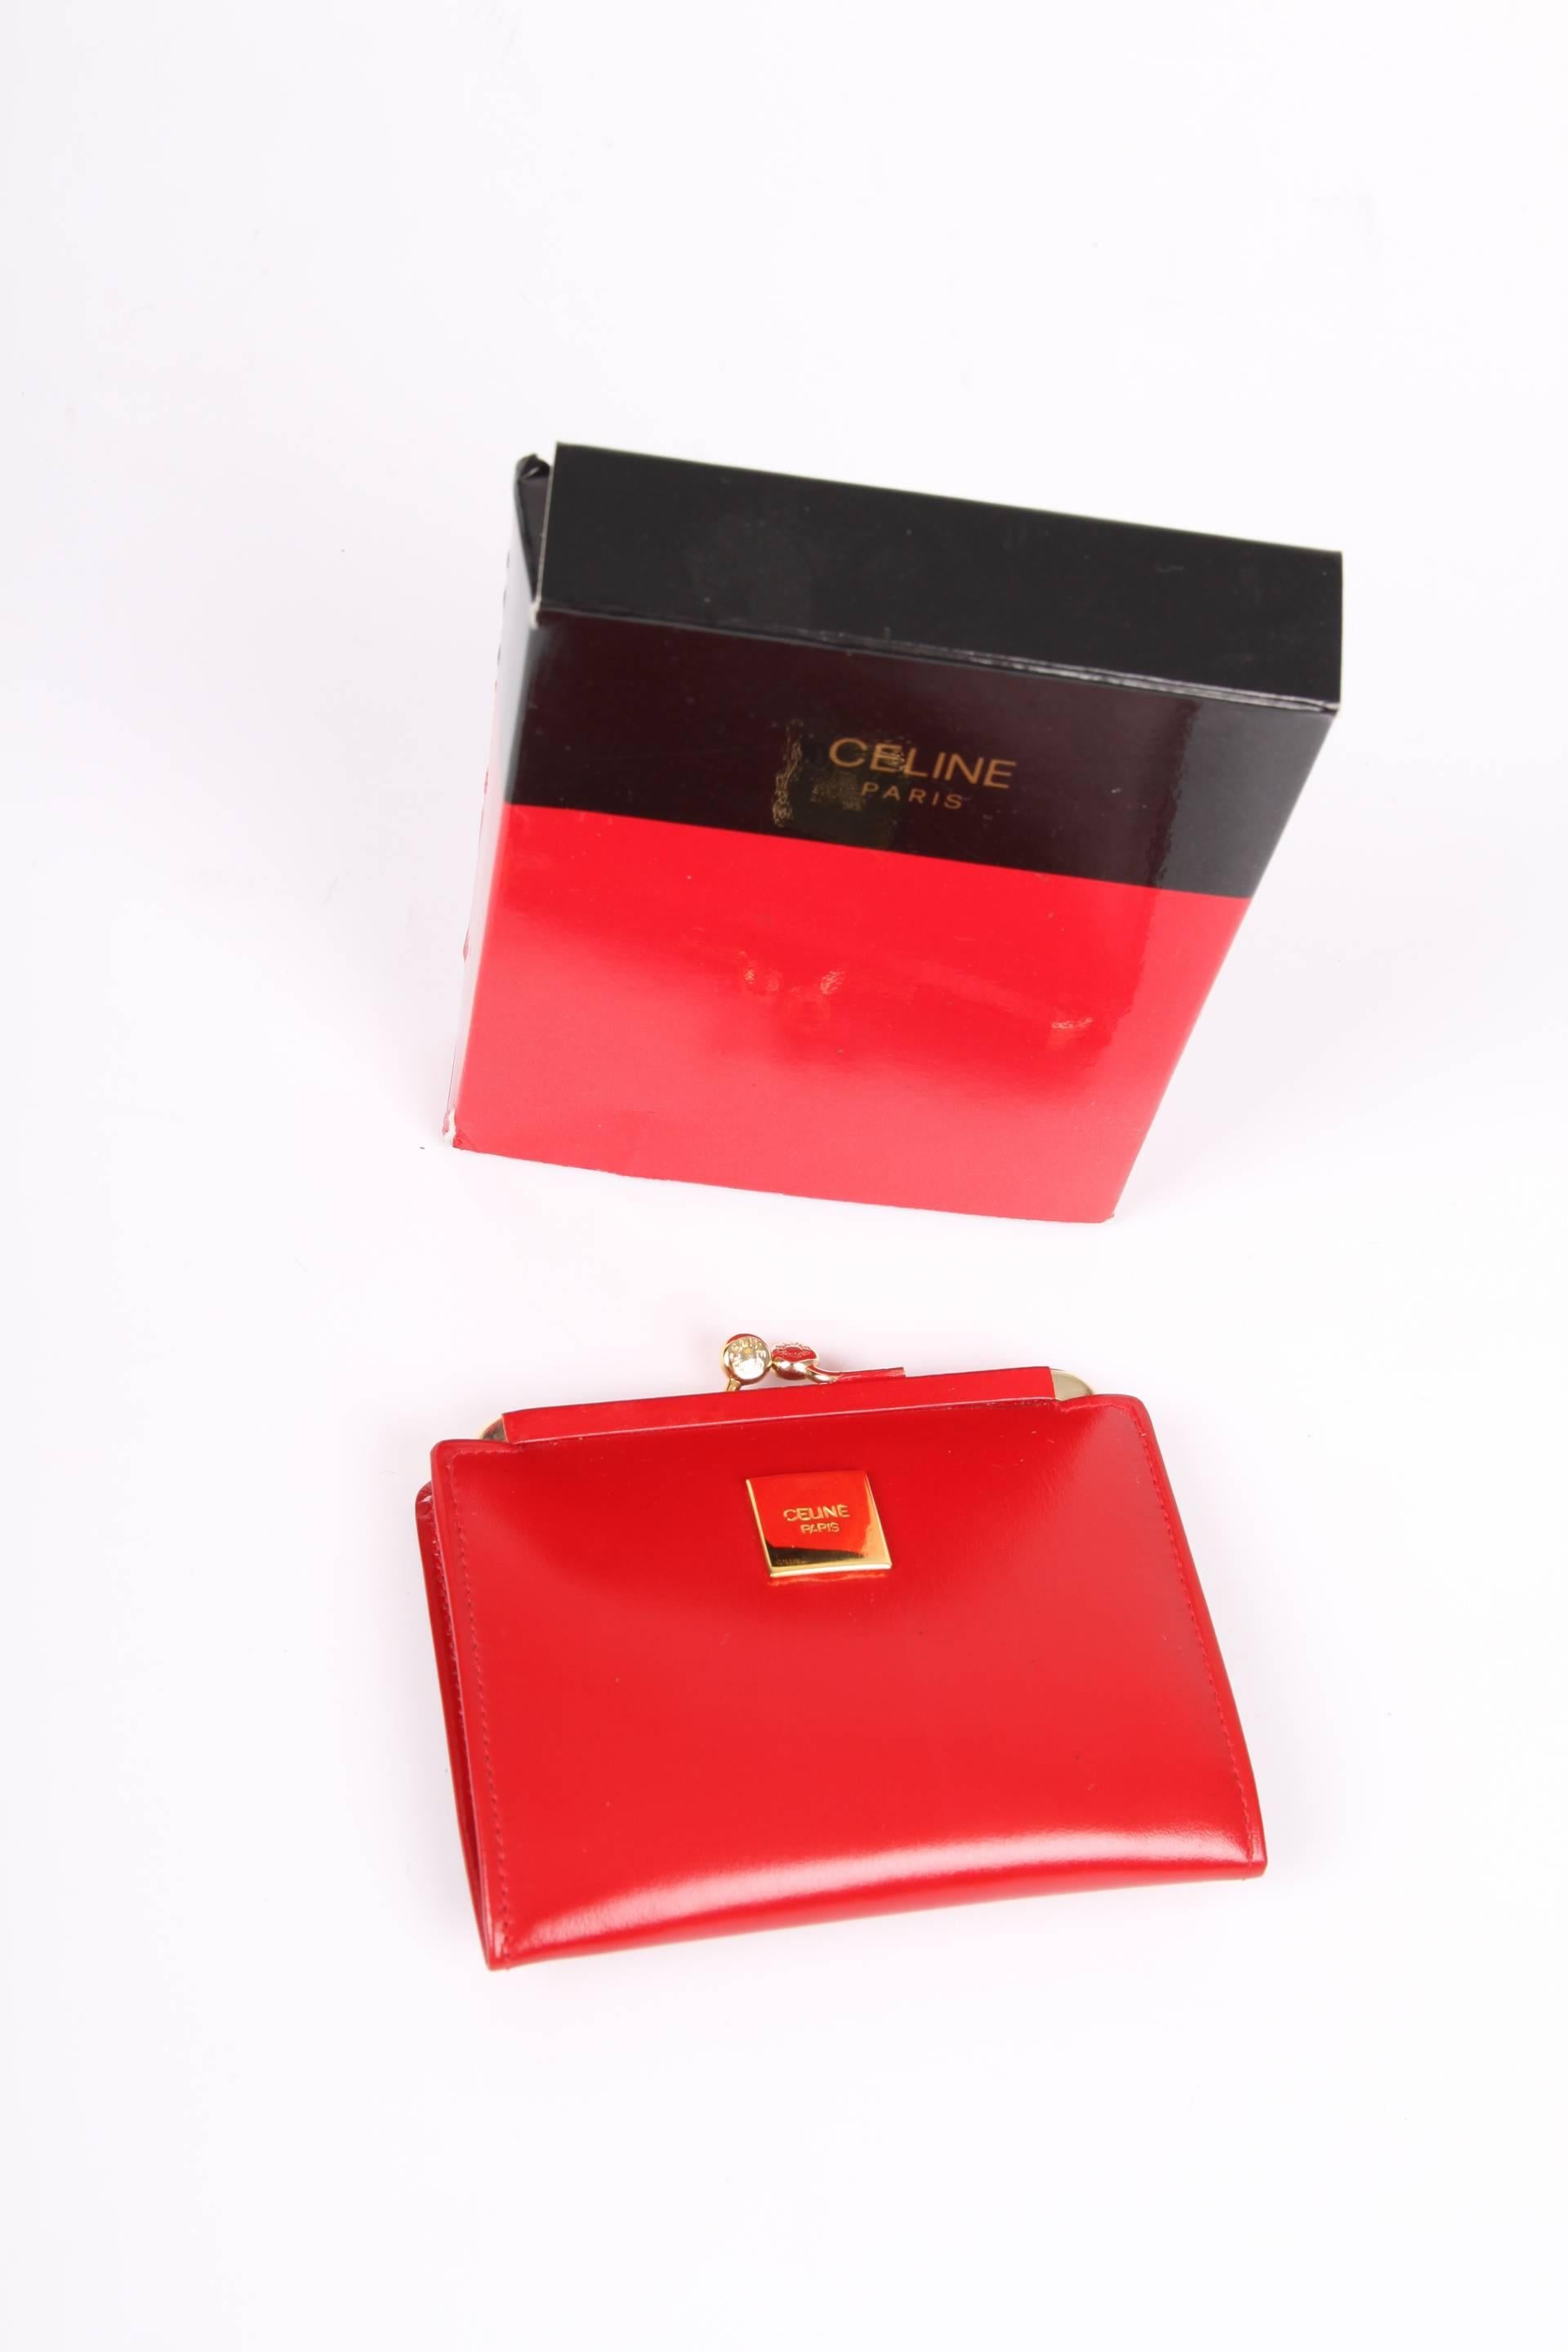 Red leather wallet by Céline Paris with a gold-tone closure on top.

At the front a small square gold-tone plaque with CELINE logo, fully lined with red leather, three compartments on the inside.

Small size, it does not fit a credit card. Of course